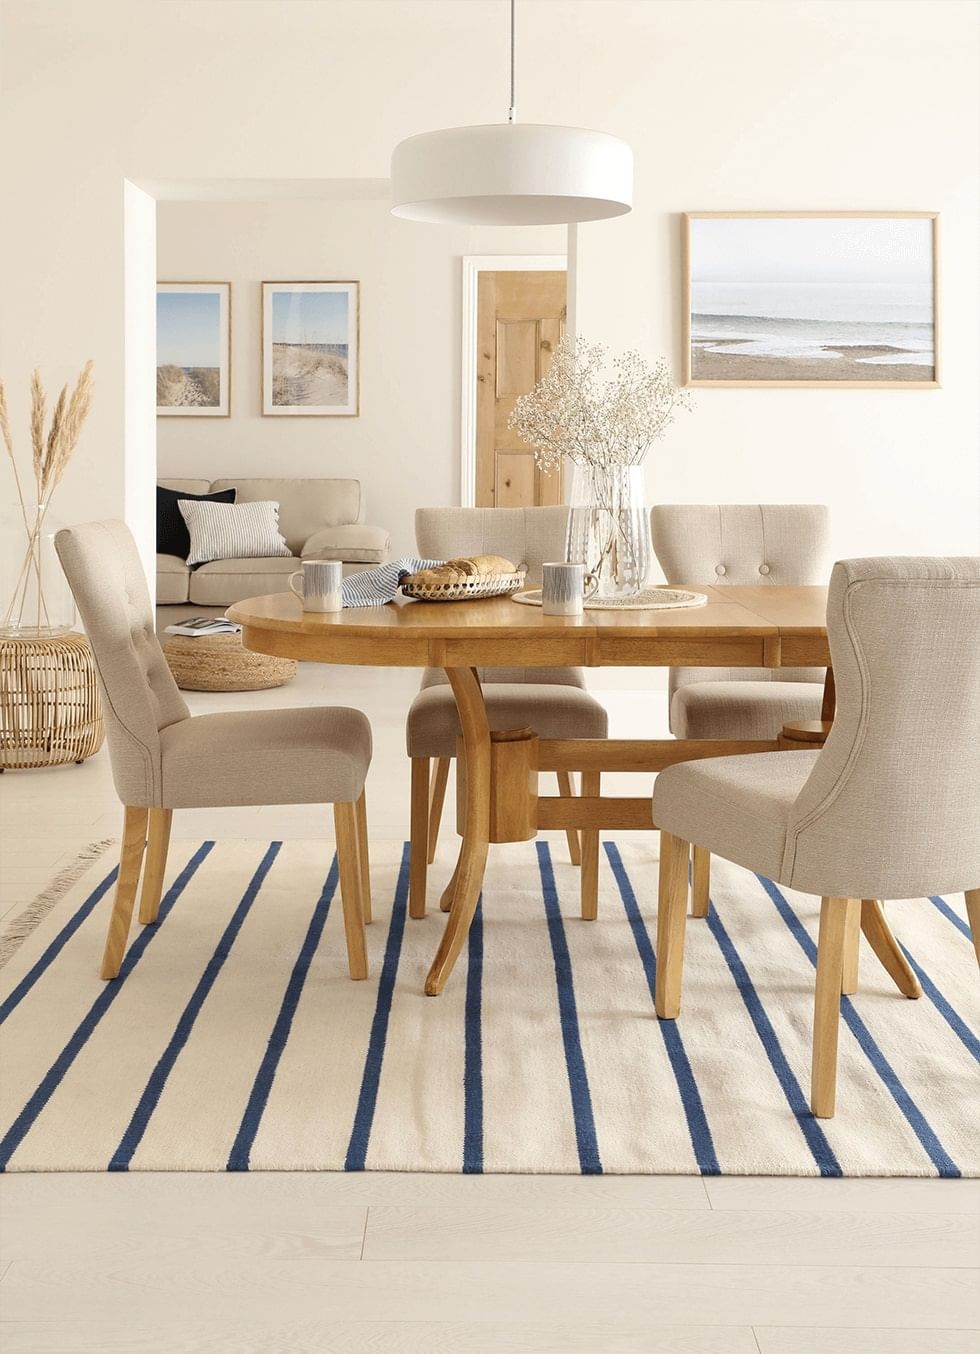 A striped rug under an oak dining table and beige fabric chairs